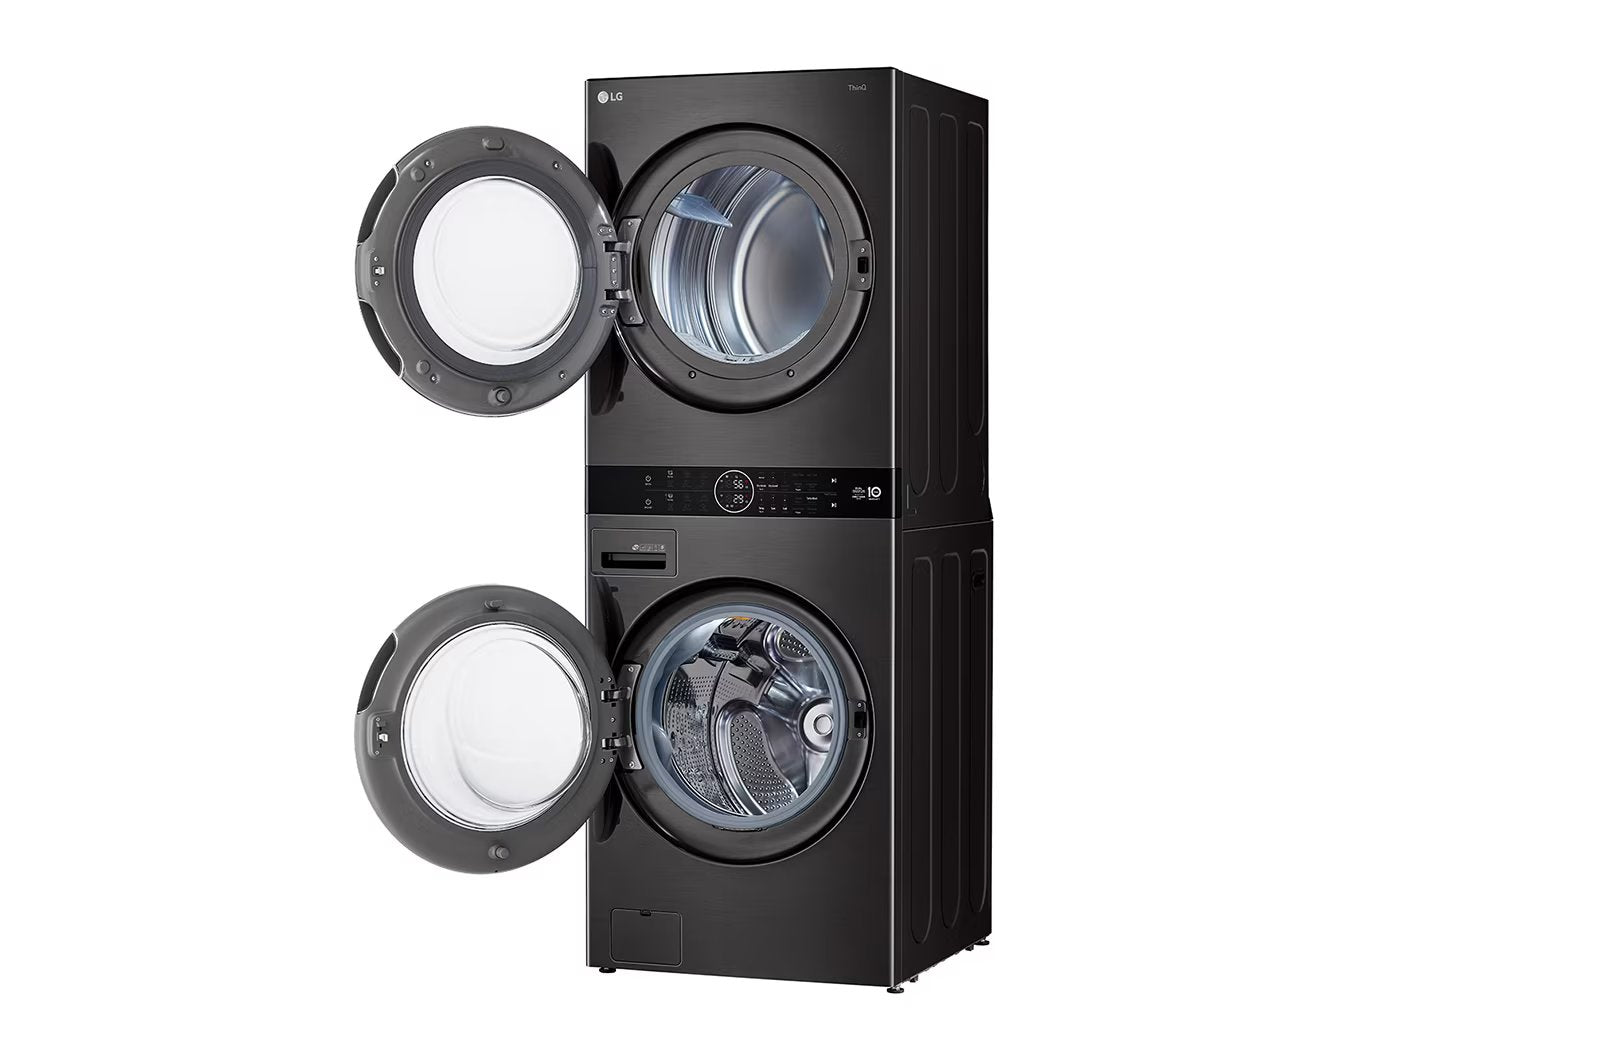 LG - 5.2 cu. Ft Washer and 7.2 Dryer Wash Tower in Black Stainless - WKHC202HBA